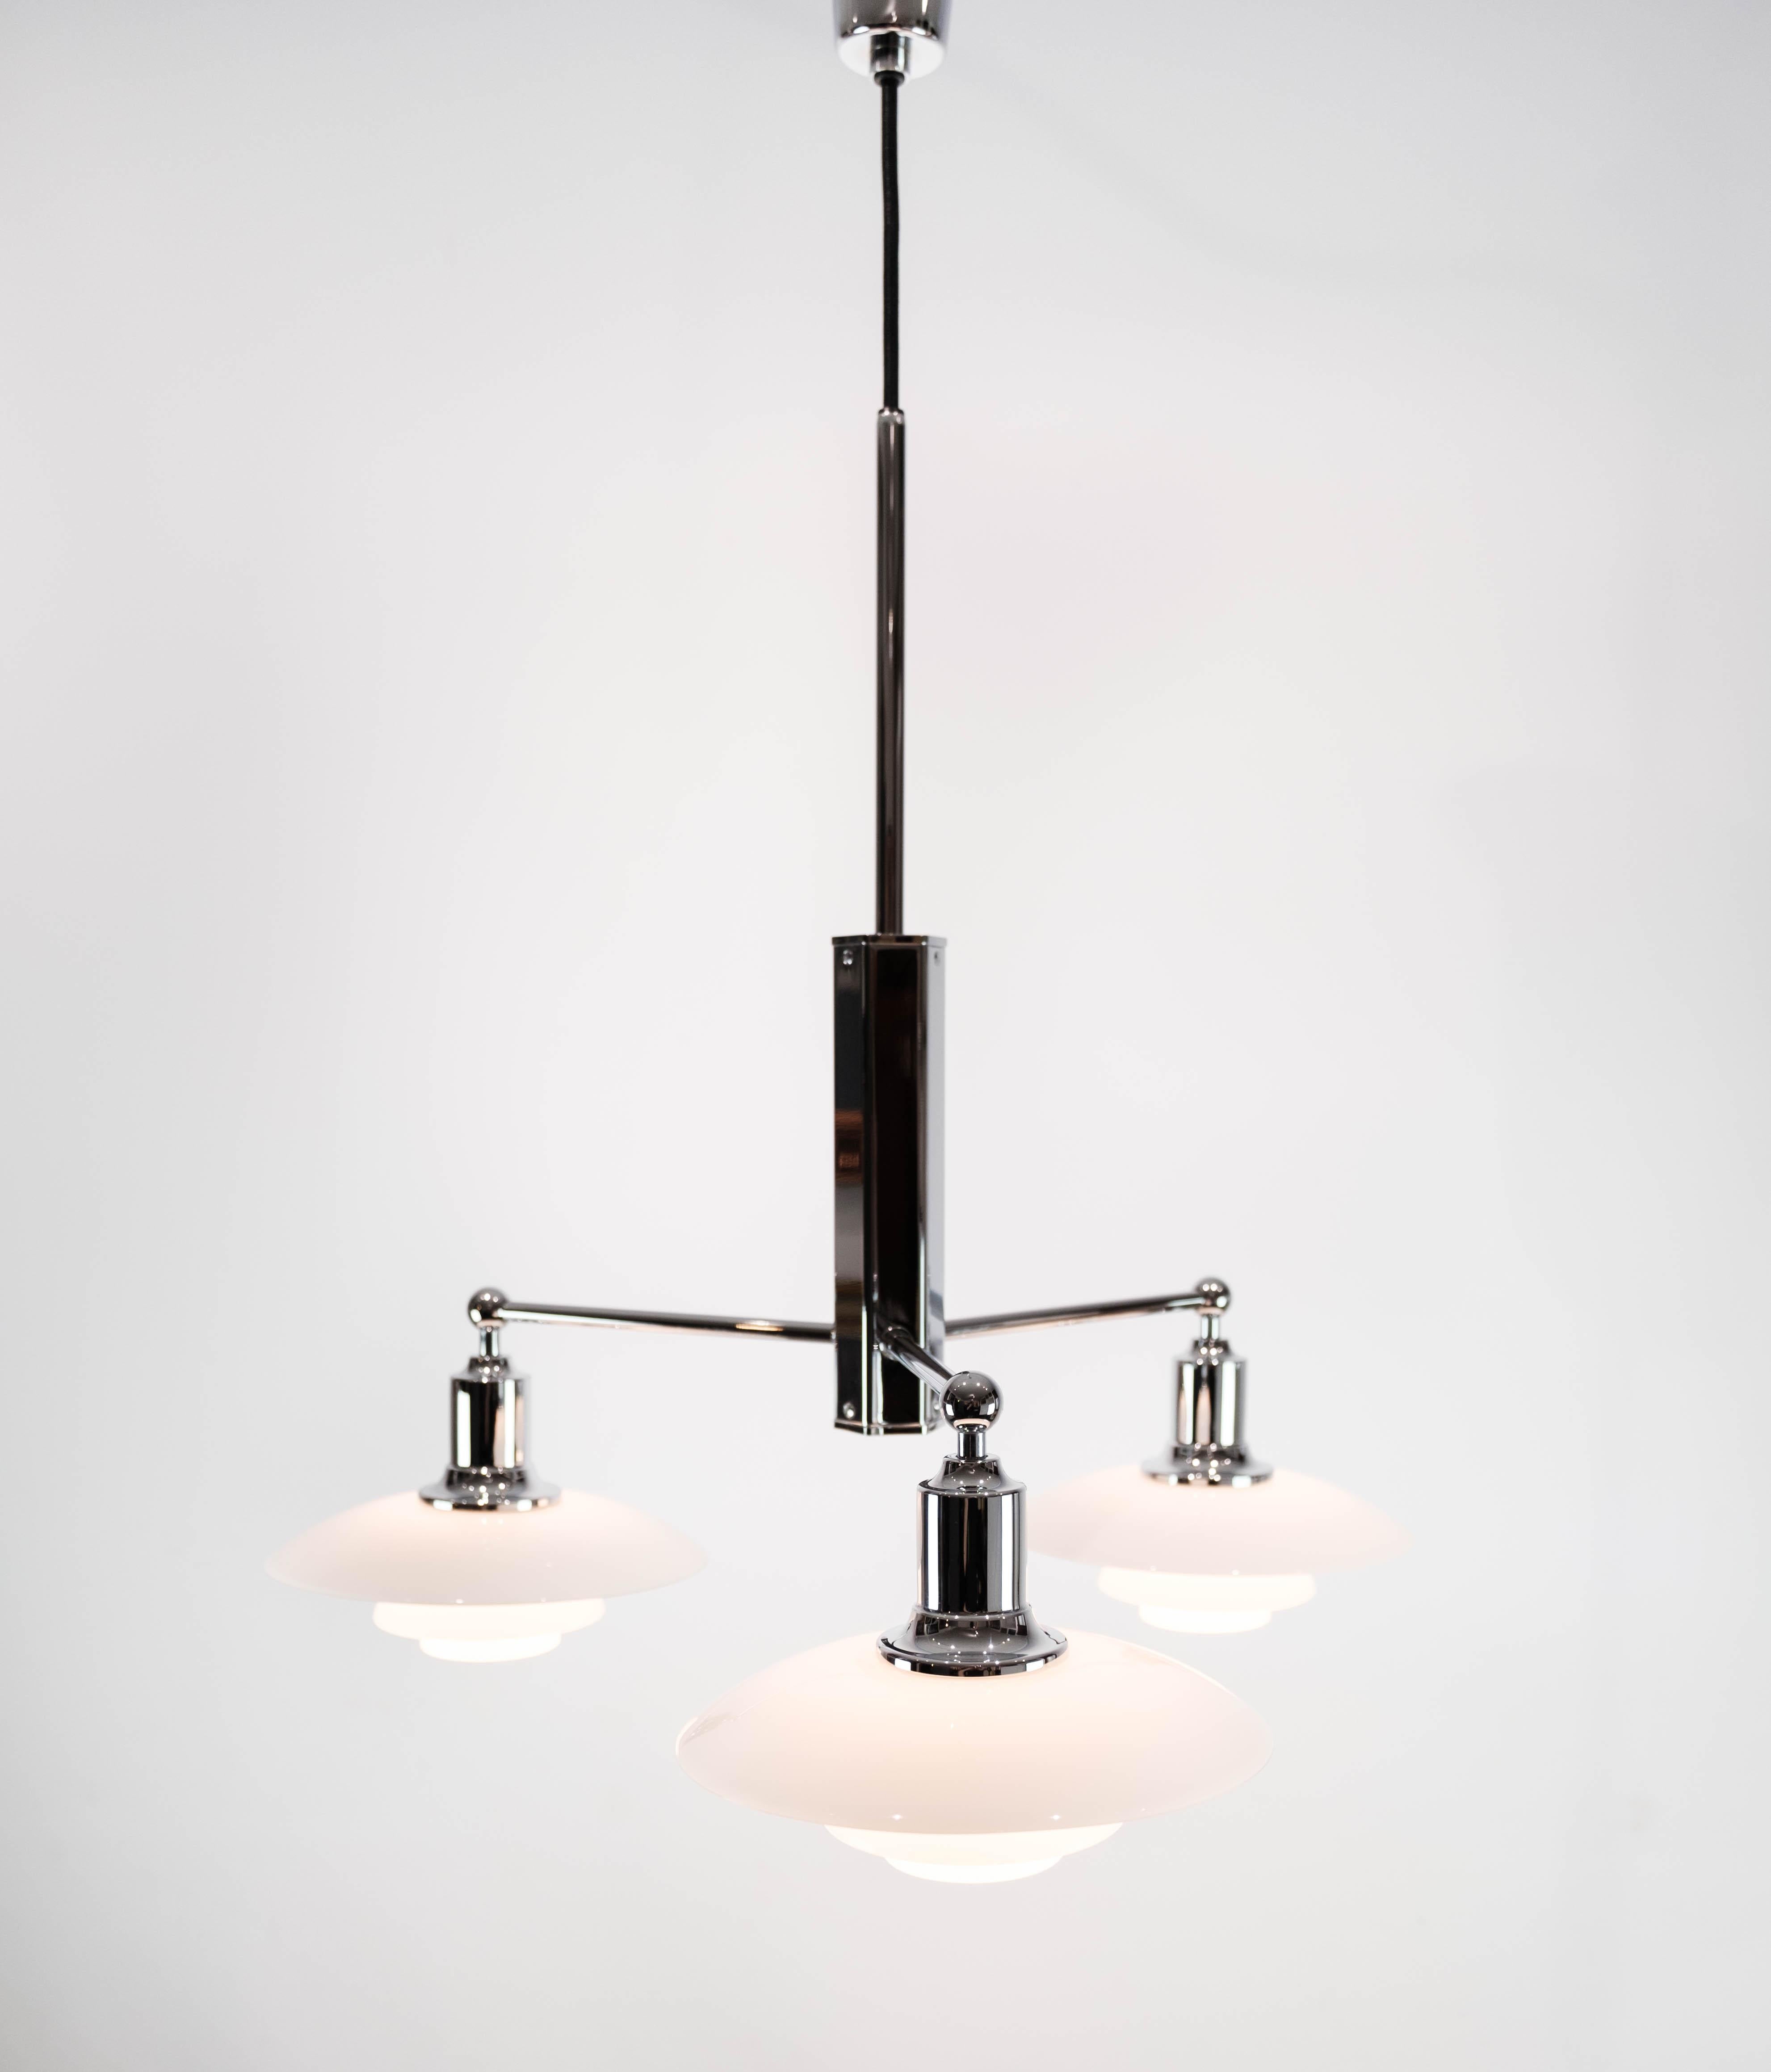 This PH 2/1 stem fitting, designed by the renowned Poul Henningsen and manufactured by Louis Poulsen in the 1980s, epitomizes the iconic Danish lighting design of the era. Crafted from chrome, its sleek and minimalist silhouette exudes a sense of